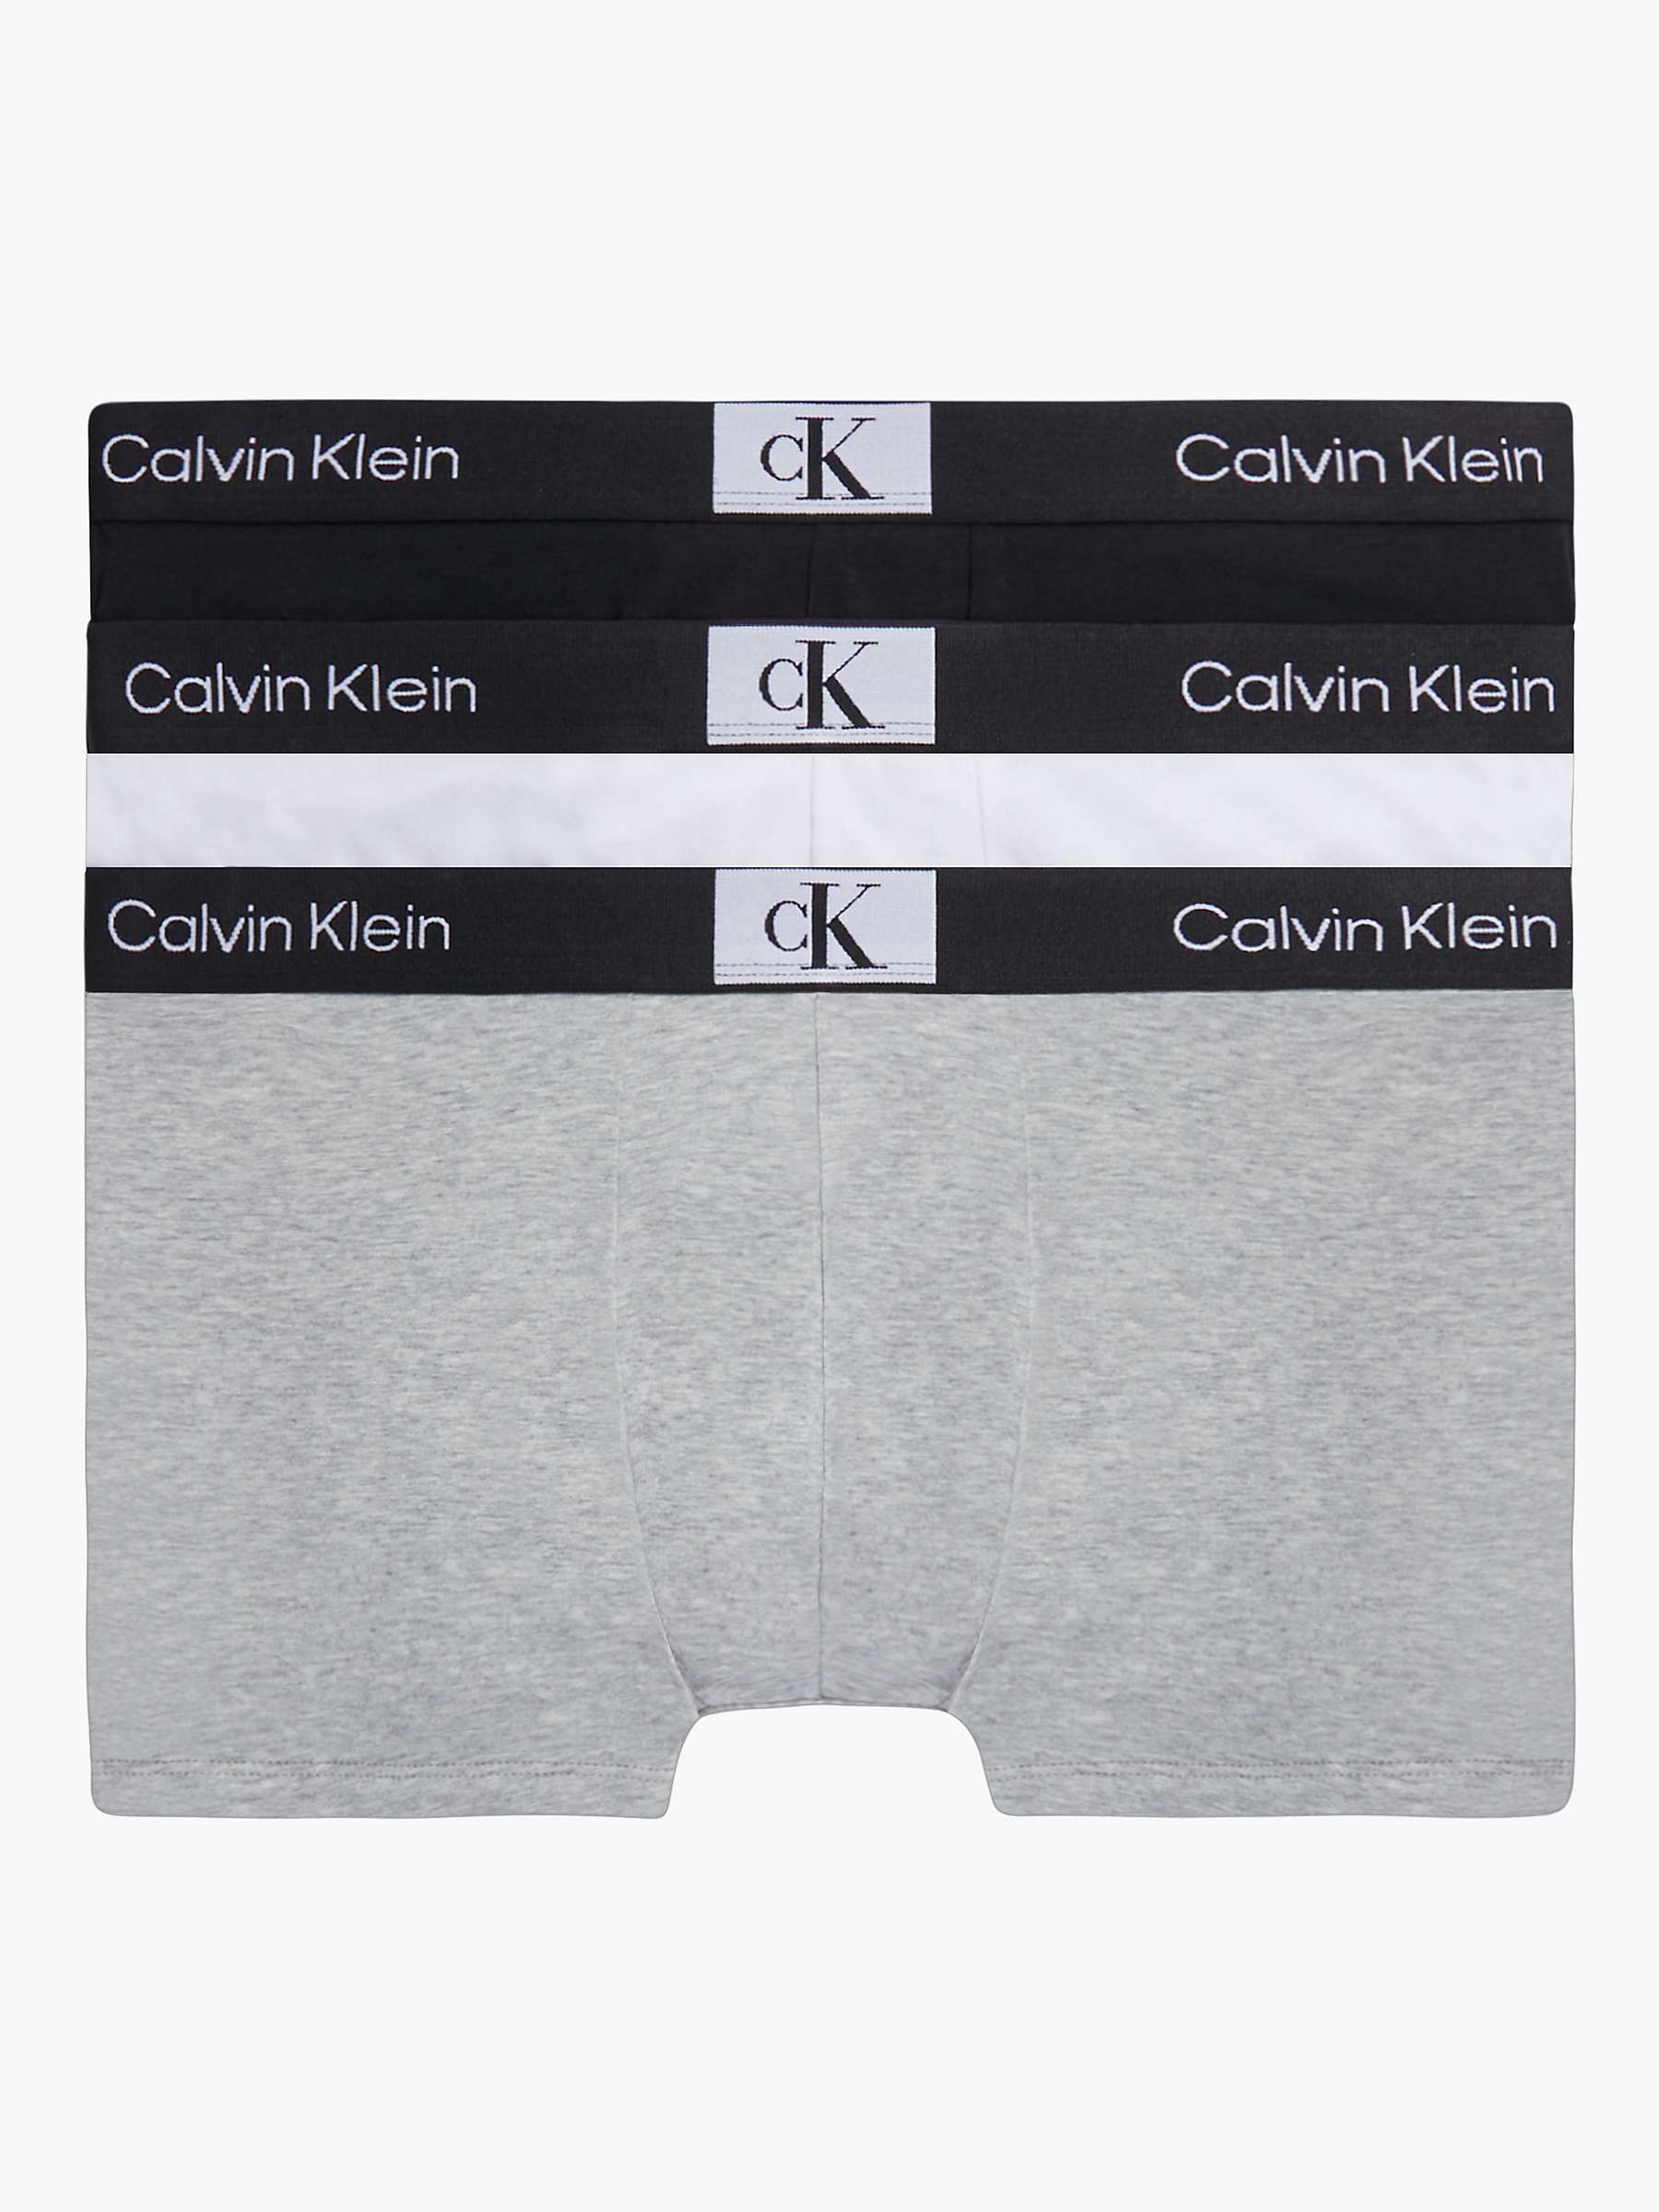 Buy Calvin Klein 1996 Cotton Stretch Trunks, Pack of 3, Black/White/Grey Online at johnlewis.com